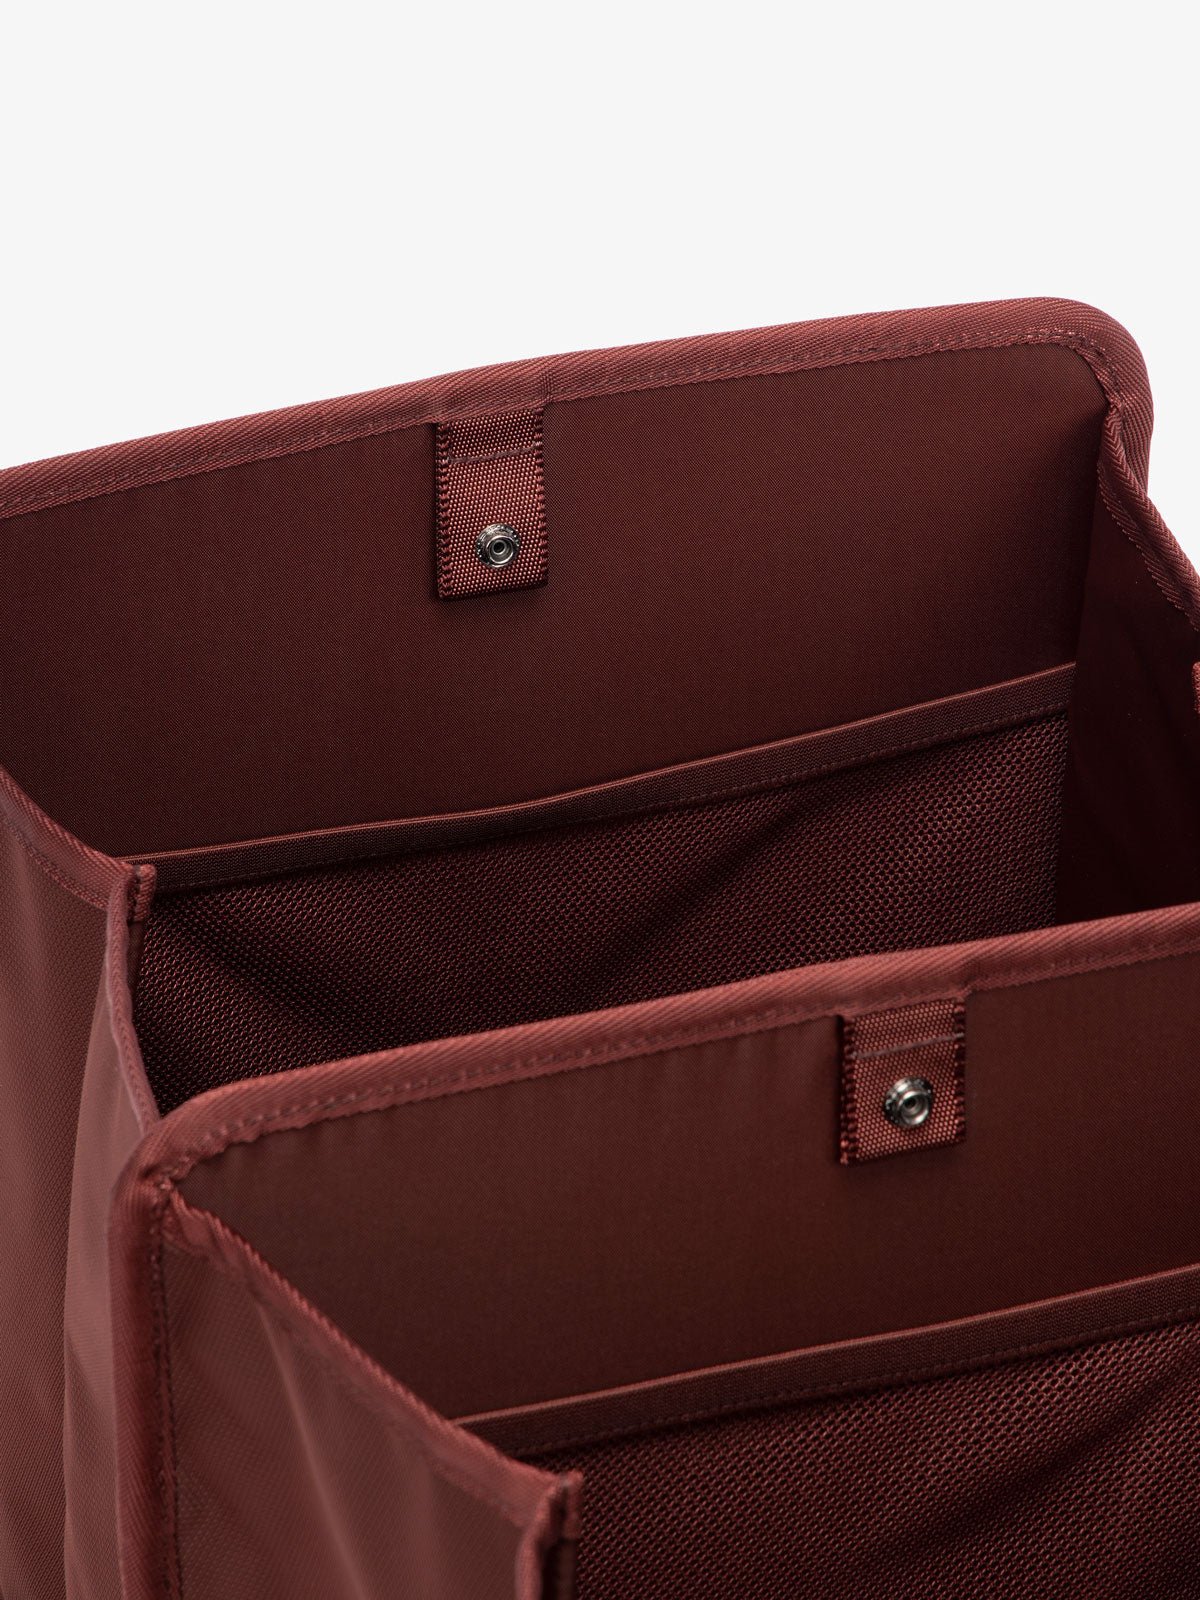 interior of trunk organizer for car in maroon